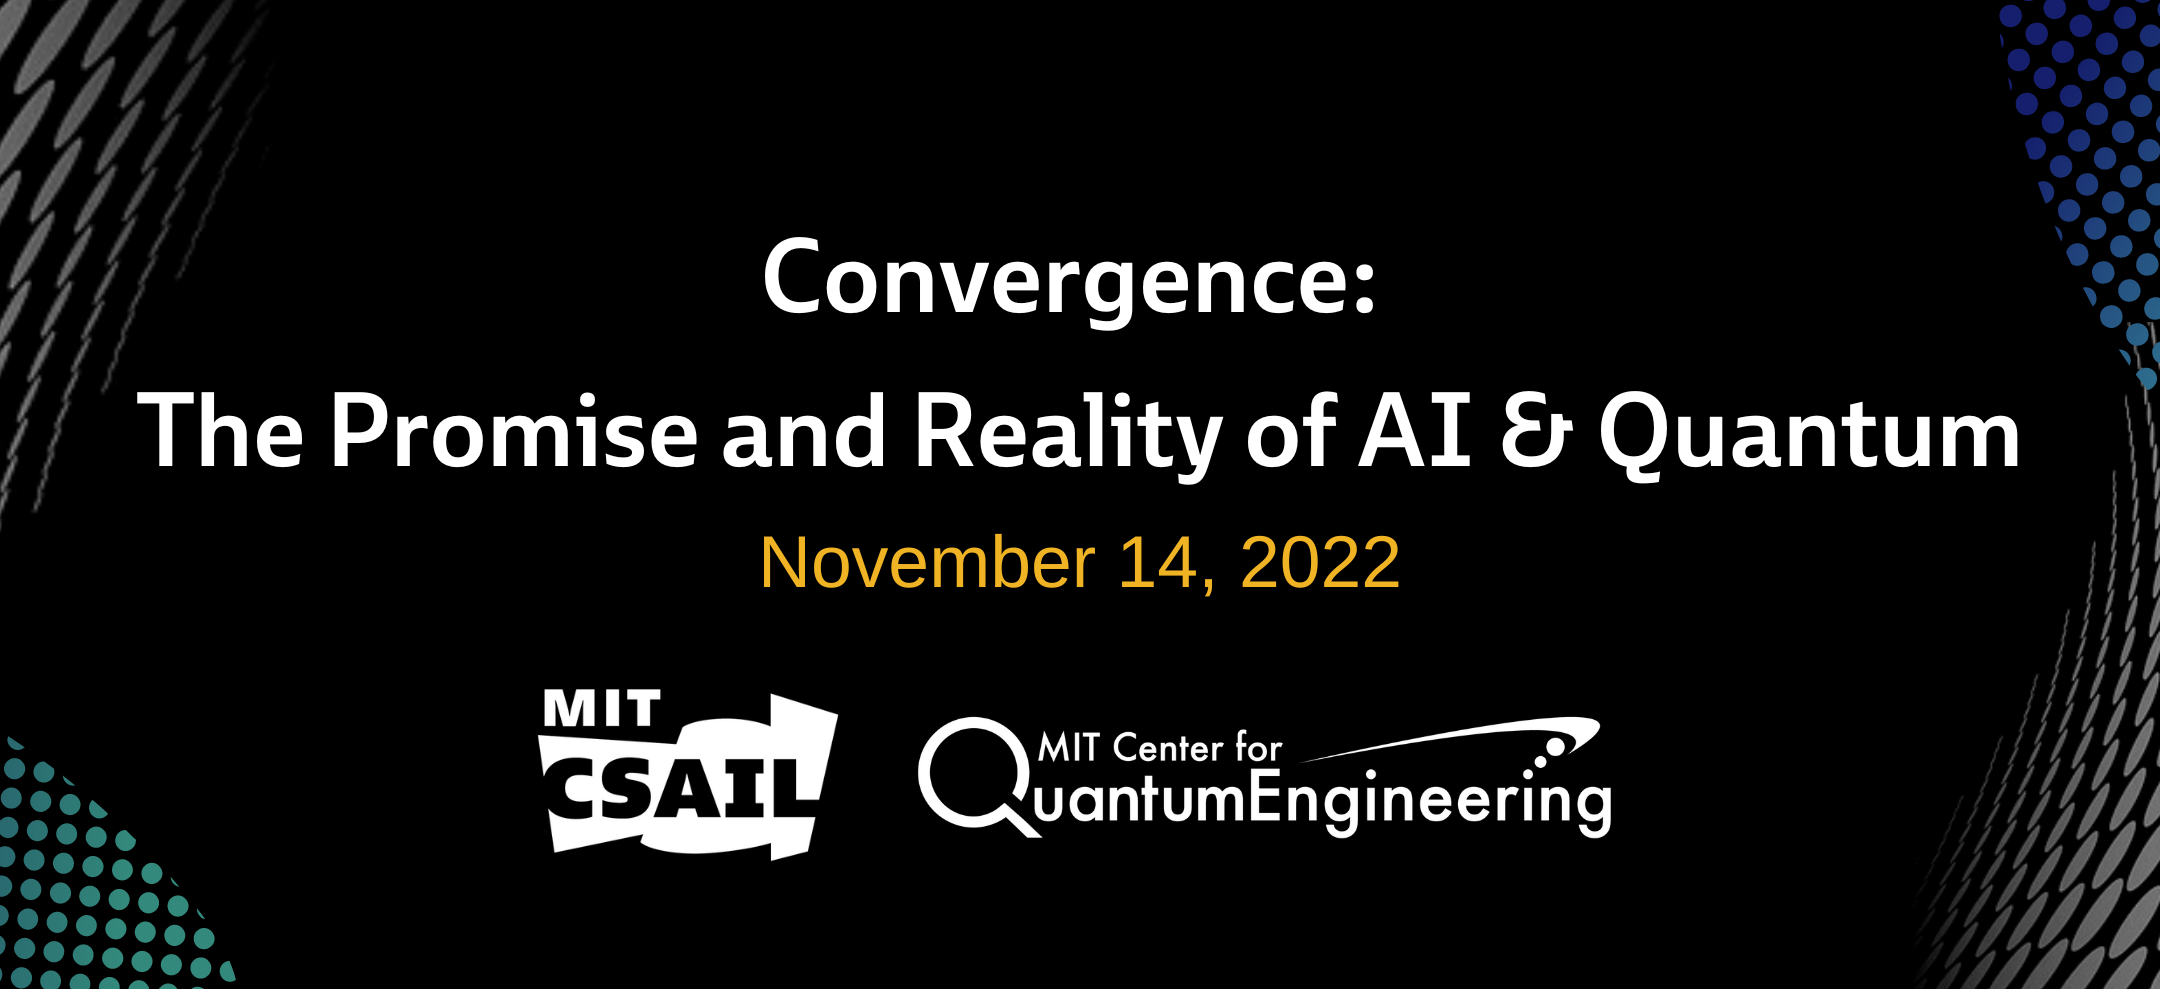 Convergence: The Promise and Reality of AI & Quantum - 2022 Event Image